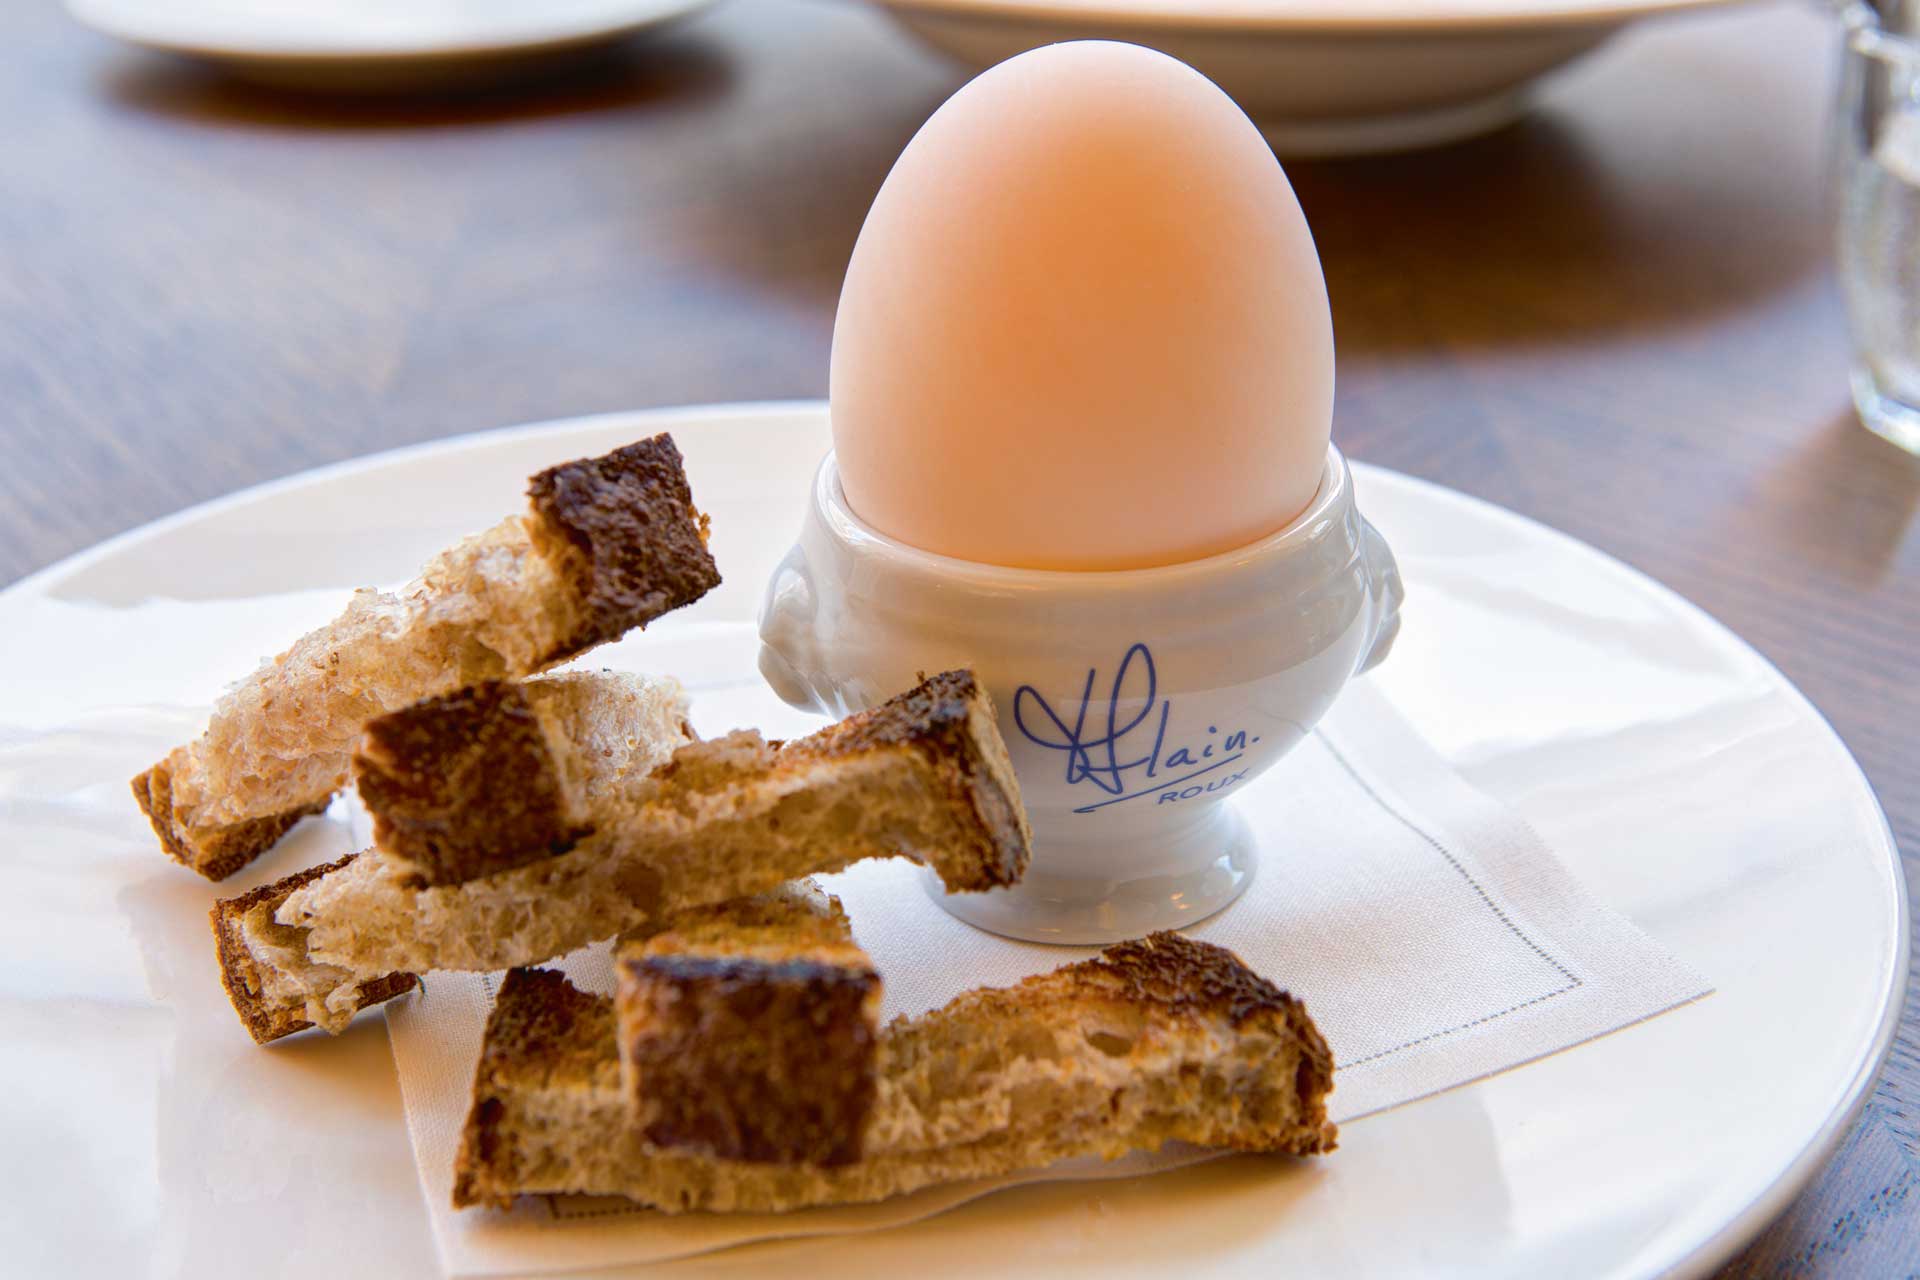 Boiled egg and soldiers at The Balmoral's restaurant Brasserie Prince